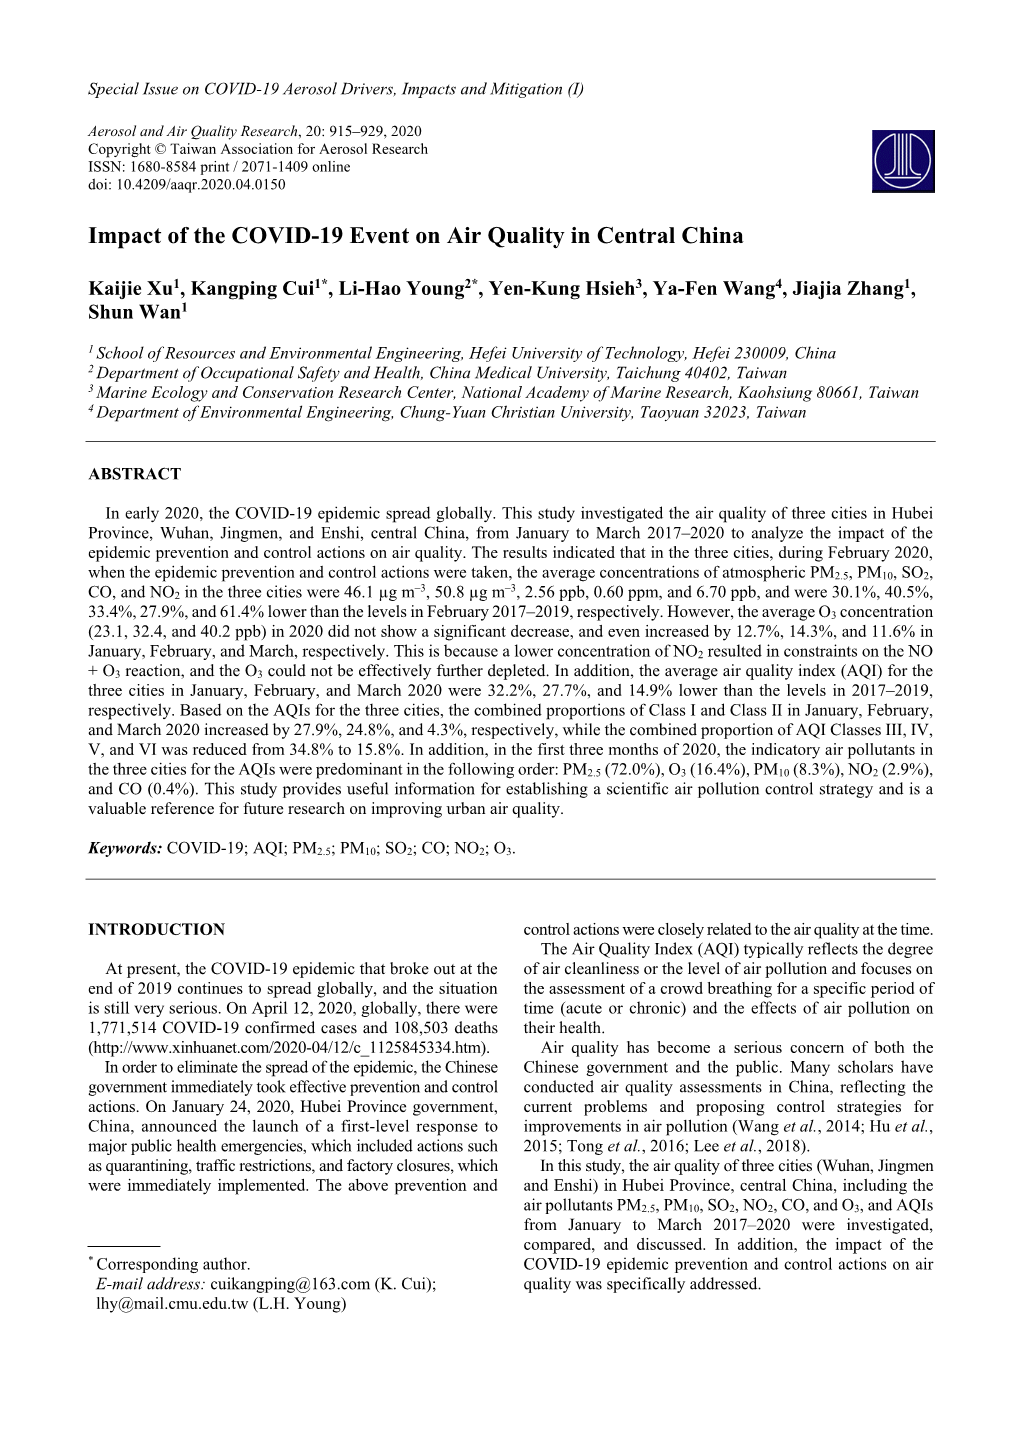 Impact of the COVID-19 Event on Air Quality in Central China